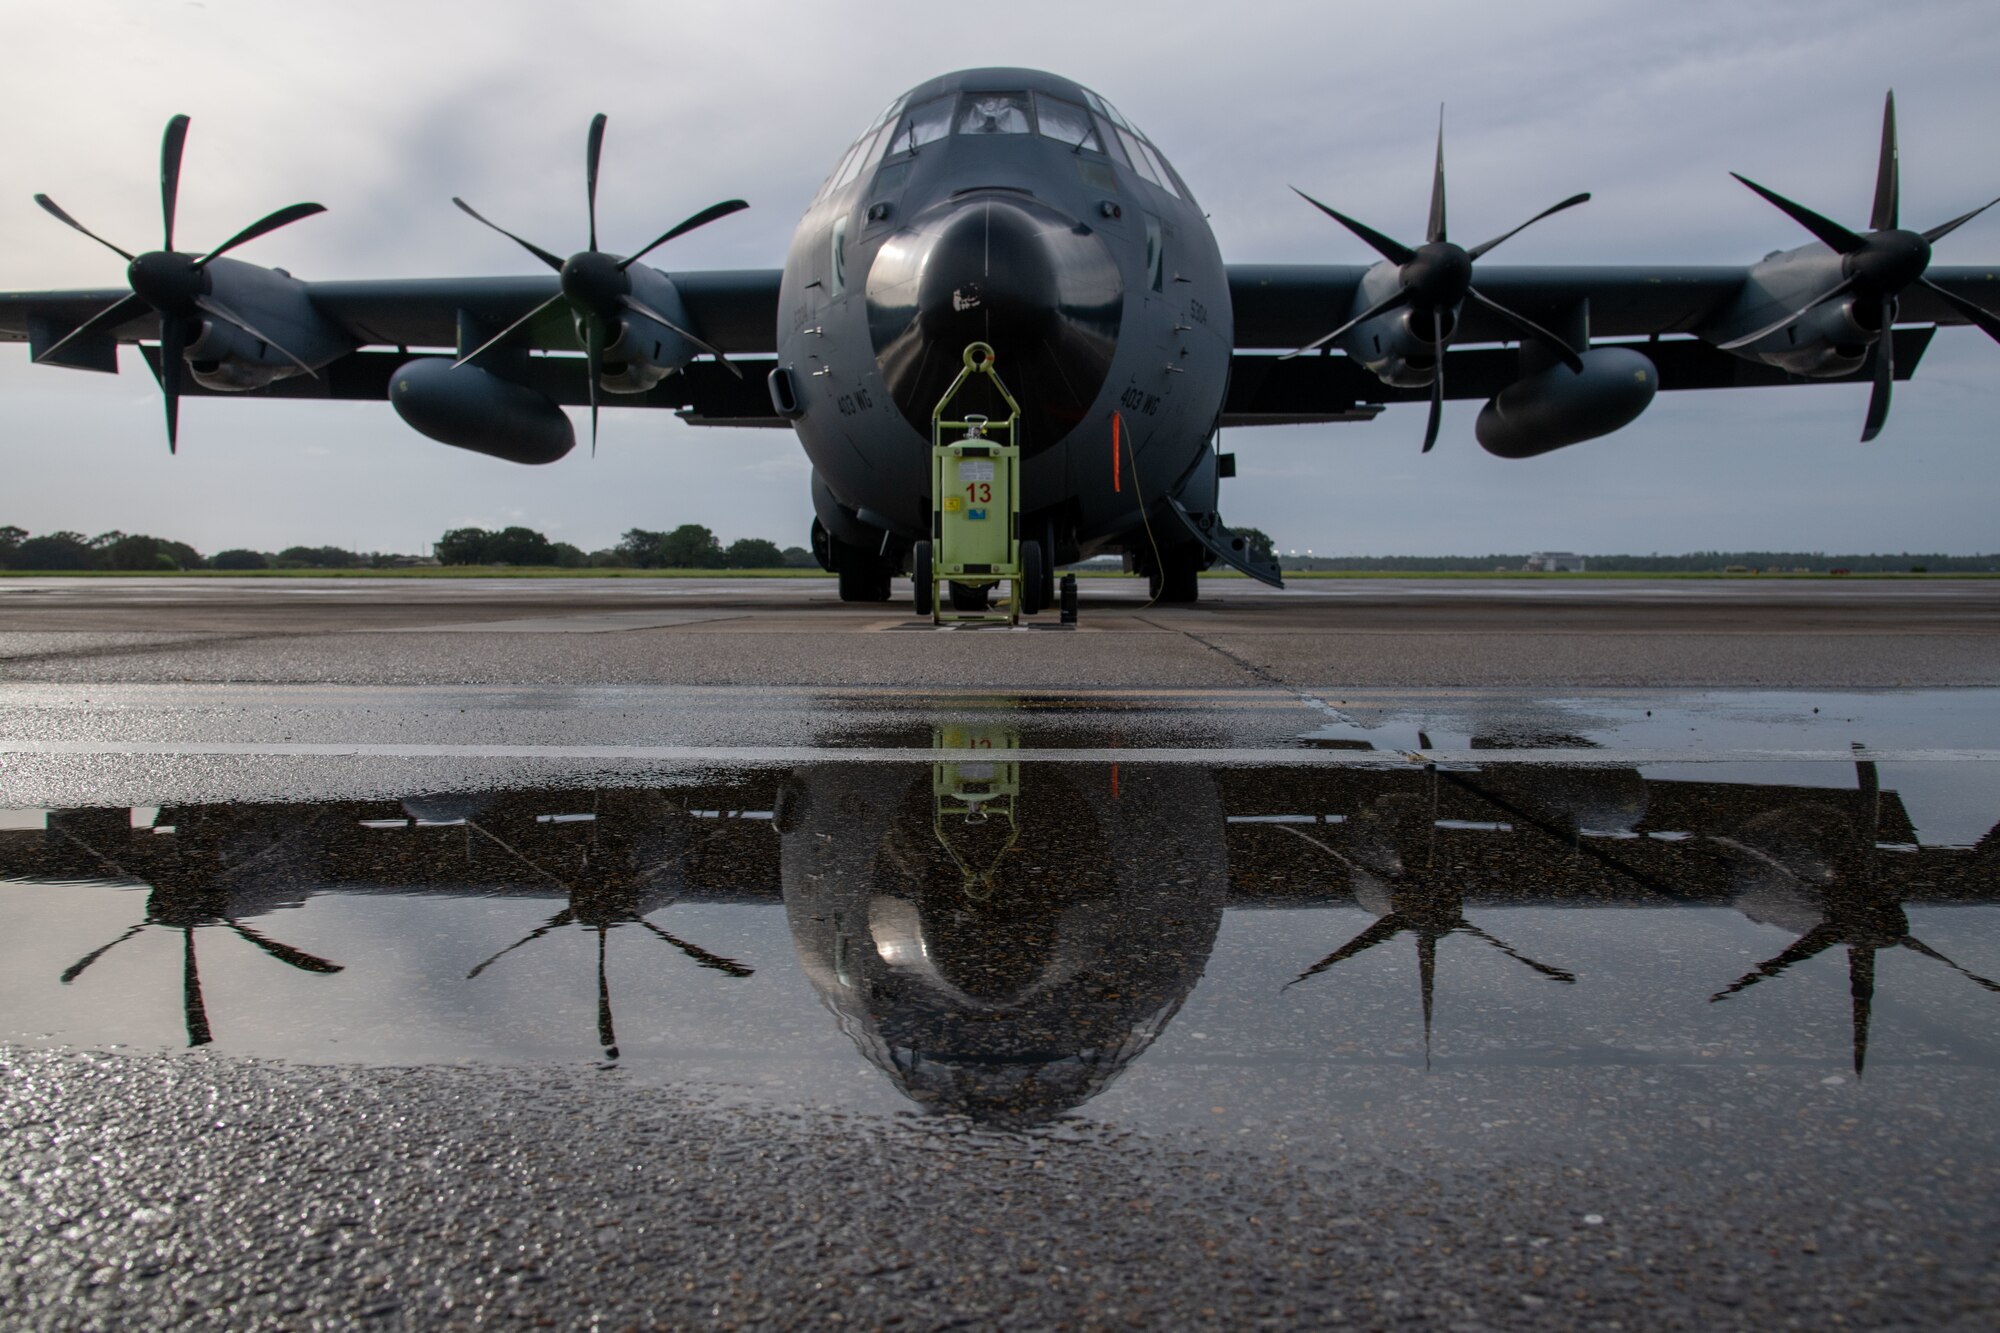 A WC-130J Super Hercules aircraft assigned to the 53rd Weather Reconnaissance Squadron at Keesler Air Force Base, Miss., sits on the flight line Aug. 27, 2021. The 53rd WRS flies reconnaissance missions into tropical systems to collect data the National Hurricane Center uses for forecasting. (U.S. Air Force photo by Staff Sgt. Kristen Pittman)